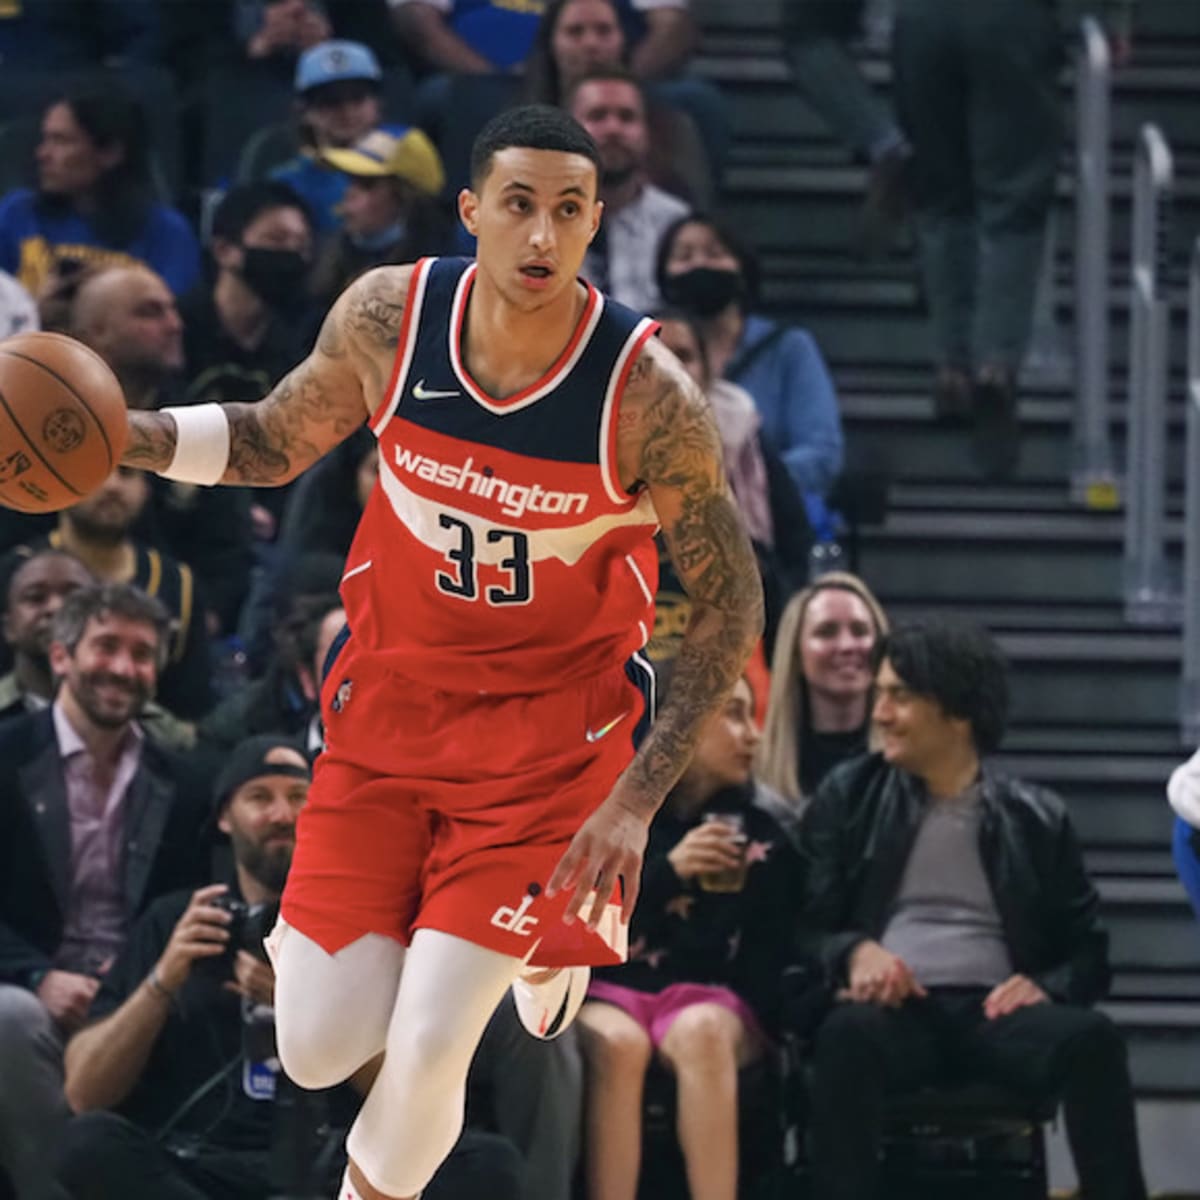 PHOTOS: New Washington Wizards Uniforms, Where The Past Meets The